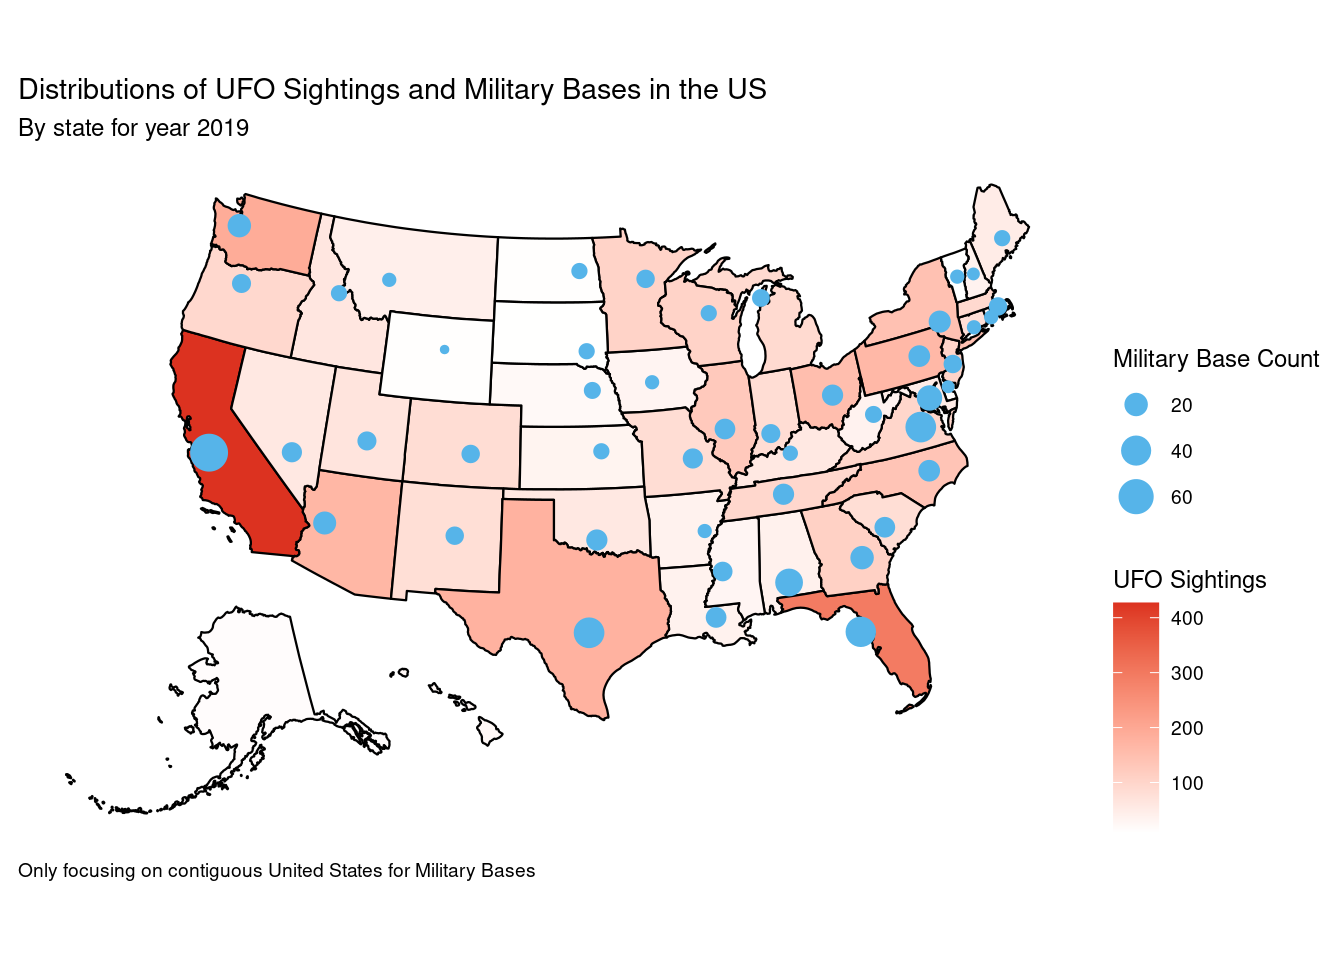 Distribution of UFO sightings in the US by state for the year 2019 using a density map. Military base count by state is also overlaid in the map by the size of the circles. California has the most UFO sightings as well as military bases and there is a general trend that if a state has more military bases it also has more UFO sightings besides a few outlier states like Virginia, which has a lot of military bases, but few sightings. Also for most of the states that have very few UFO sightings also have very few military bases. For example, Wyoming has the least amount of military bases and has the fourth least amount of UFO sightings.